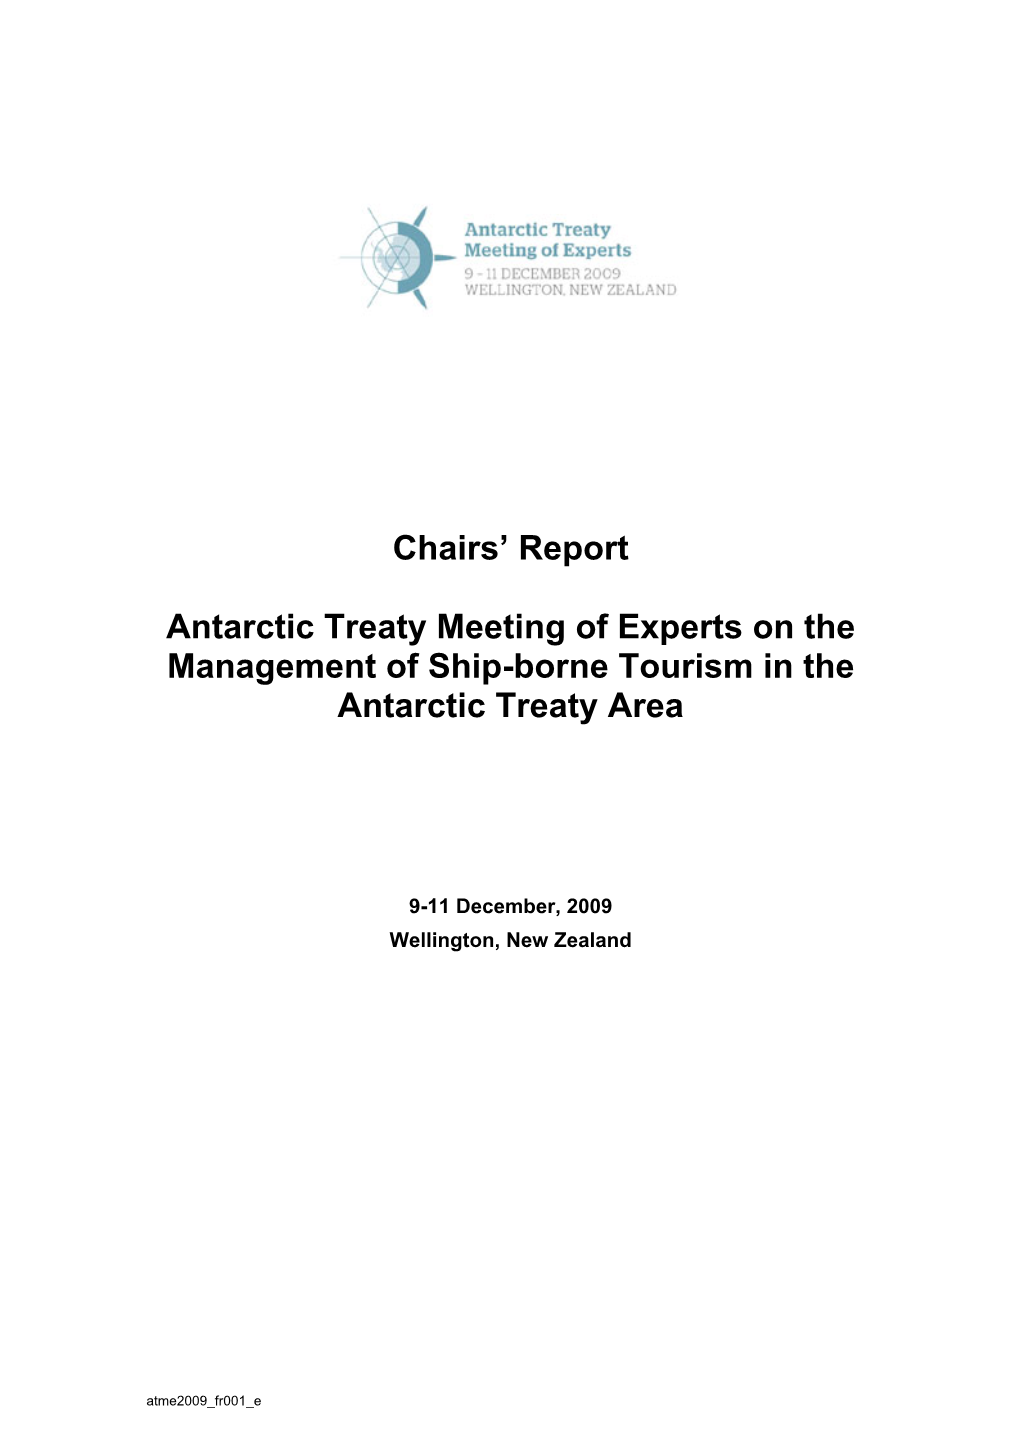 Maritime Safety in the Antarctic Treaty Area...12